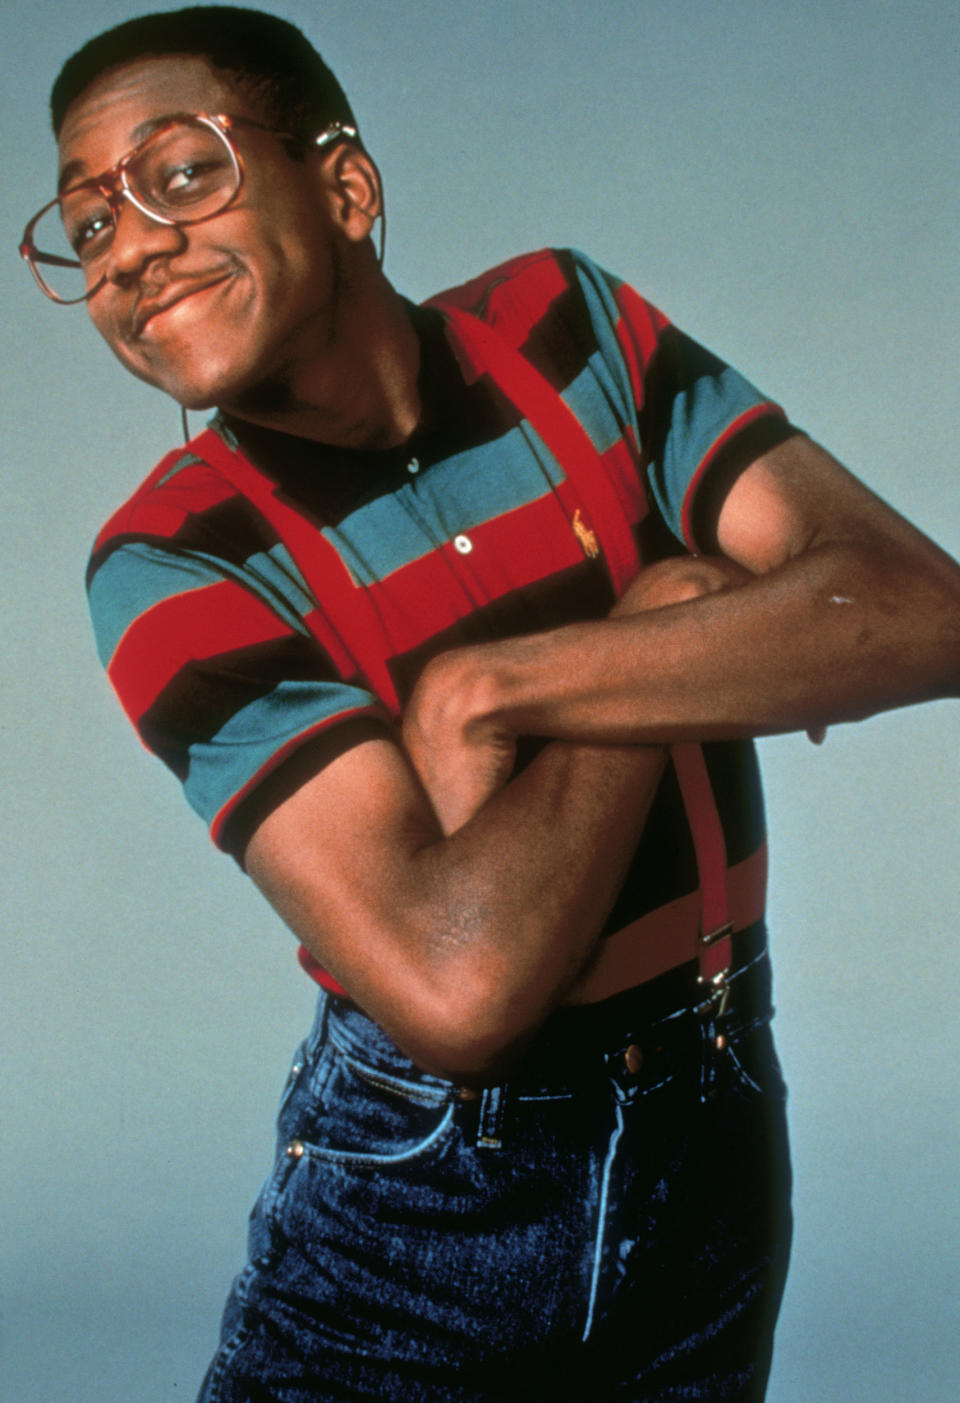 At 13 years old, Jaleel White made a name for himself as his character Steven Urkel on Family Matters.